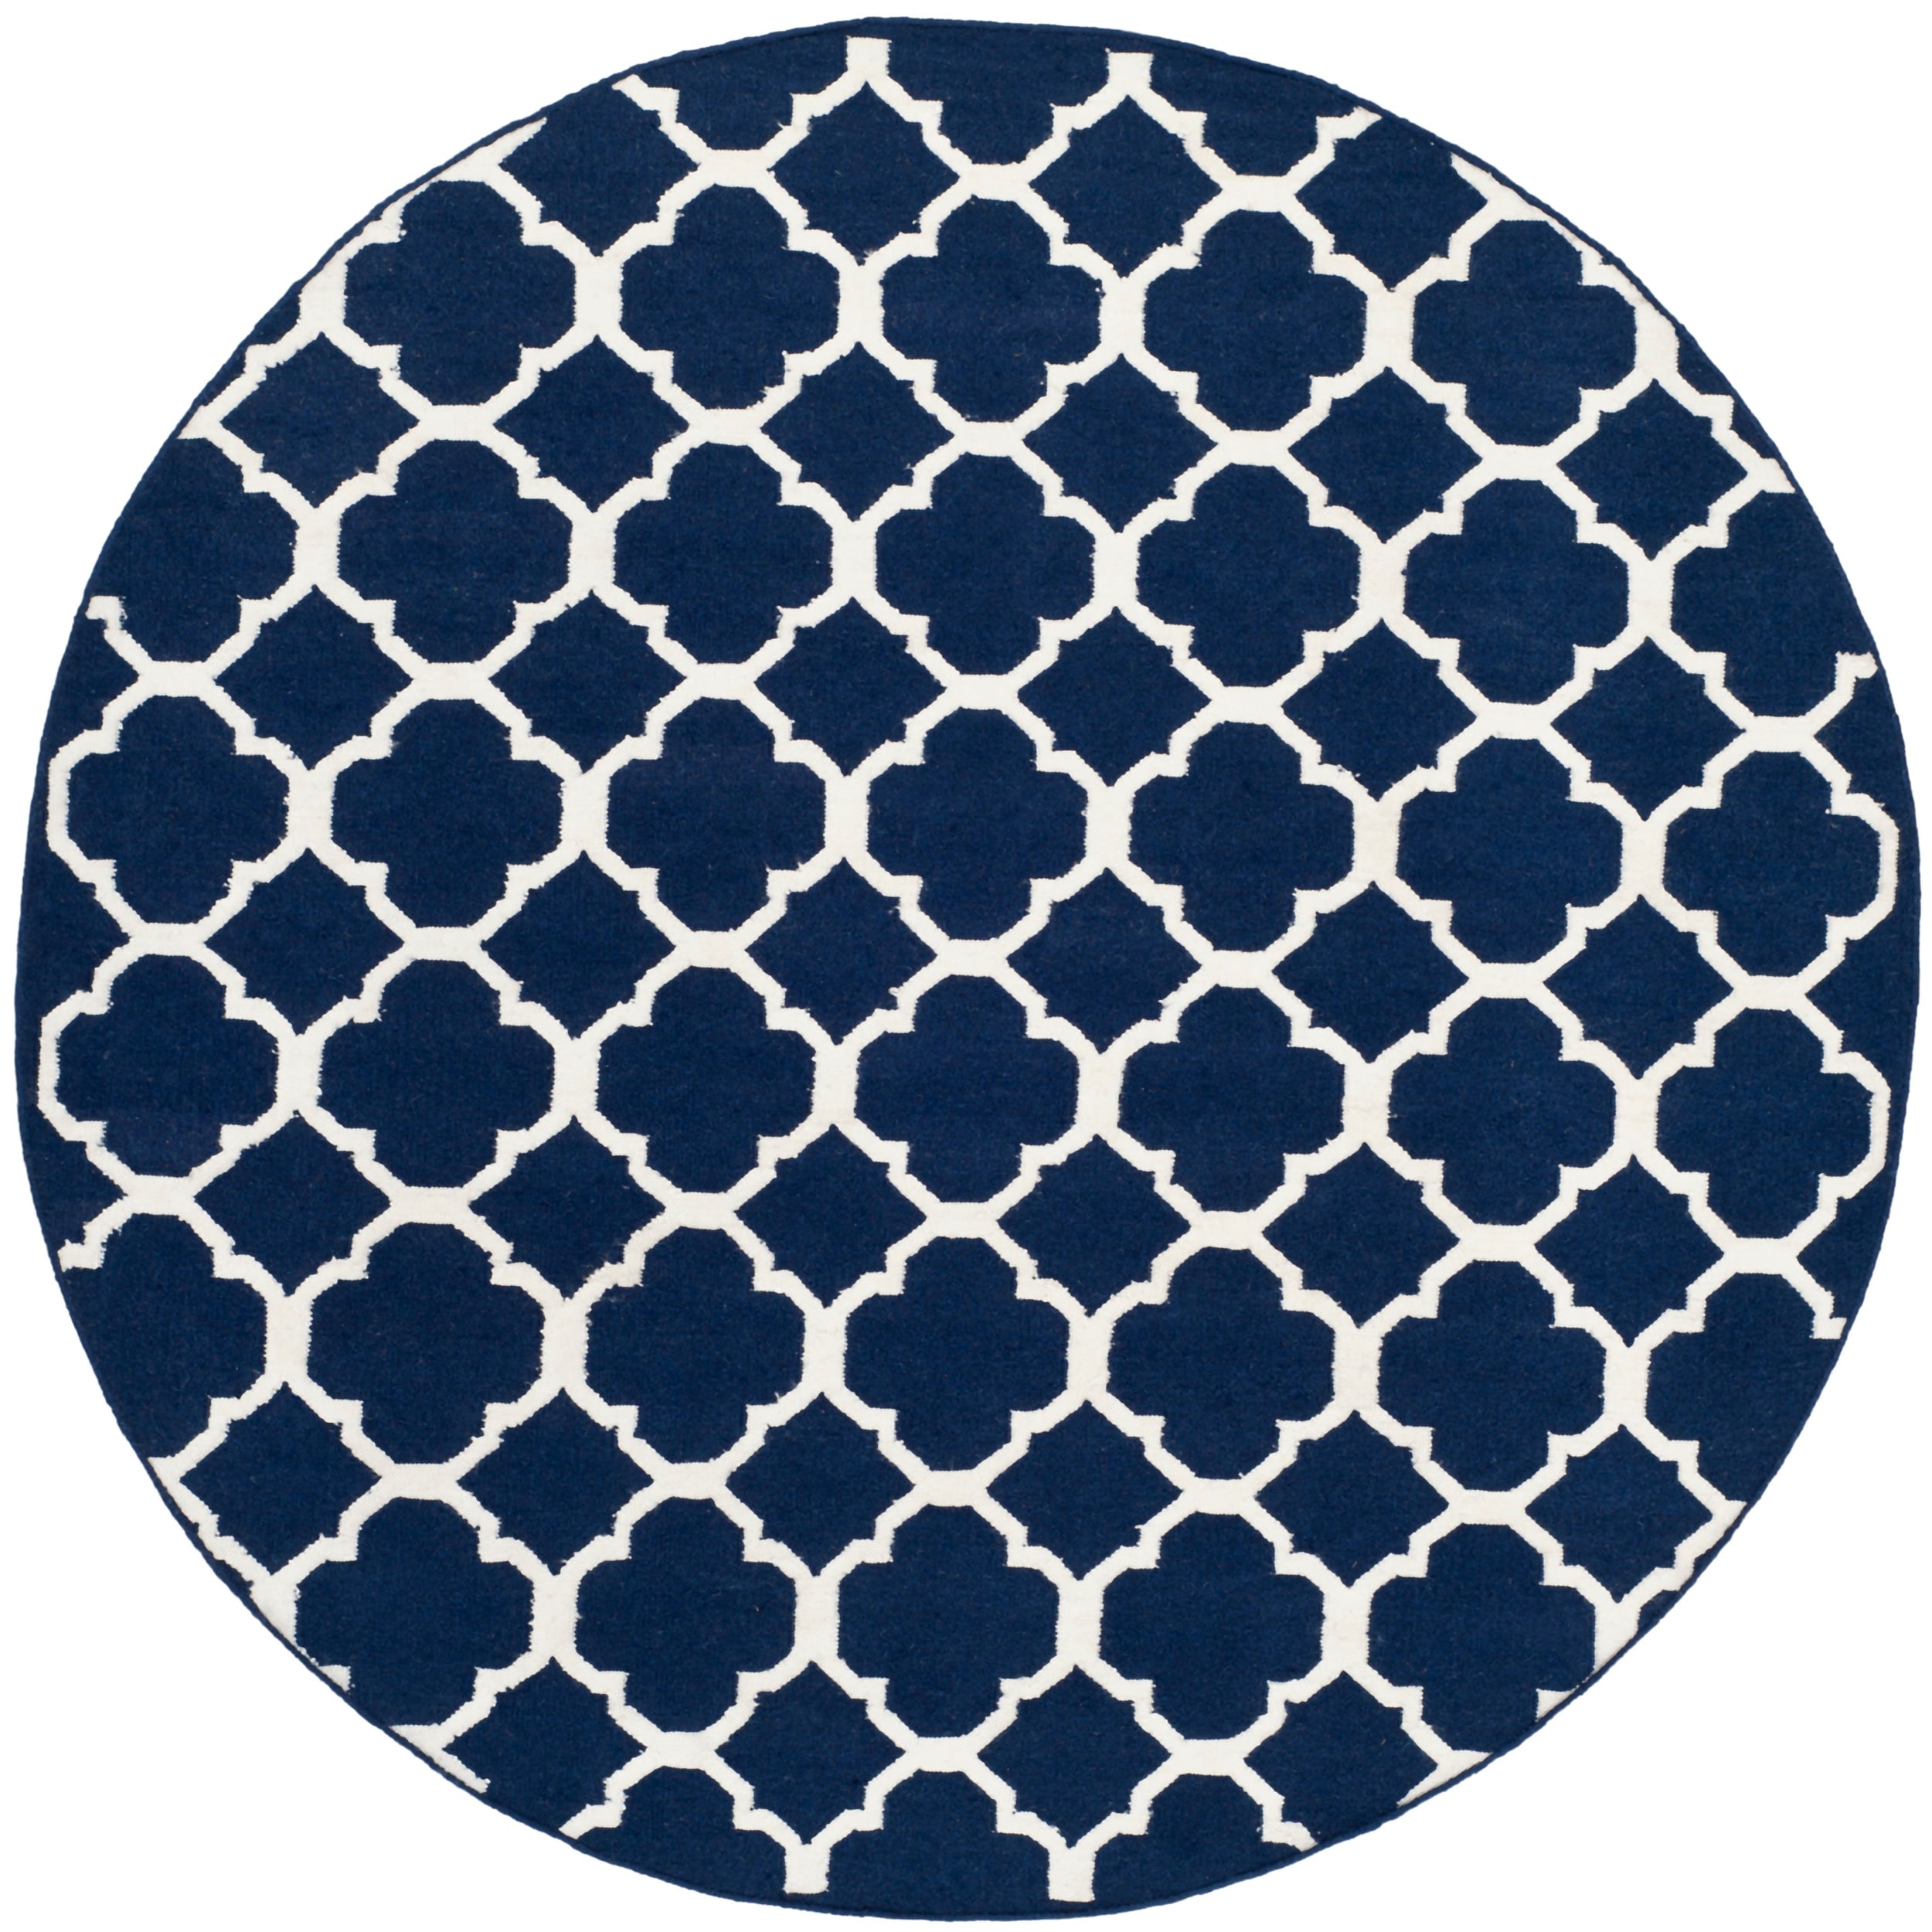 Safavieh Handwoven Moroccan Dhurrie Transitional Navy Wool Rug (7 Round)